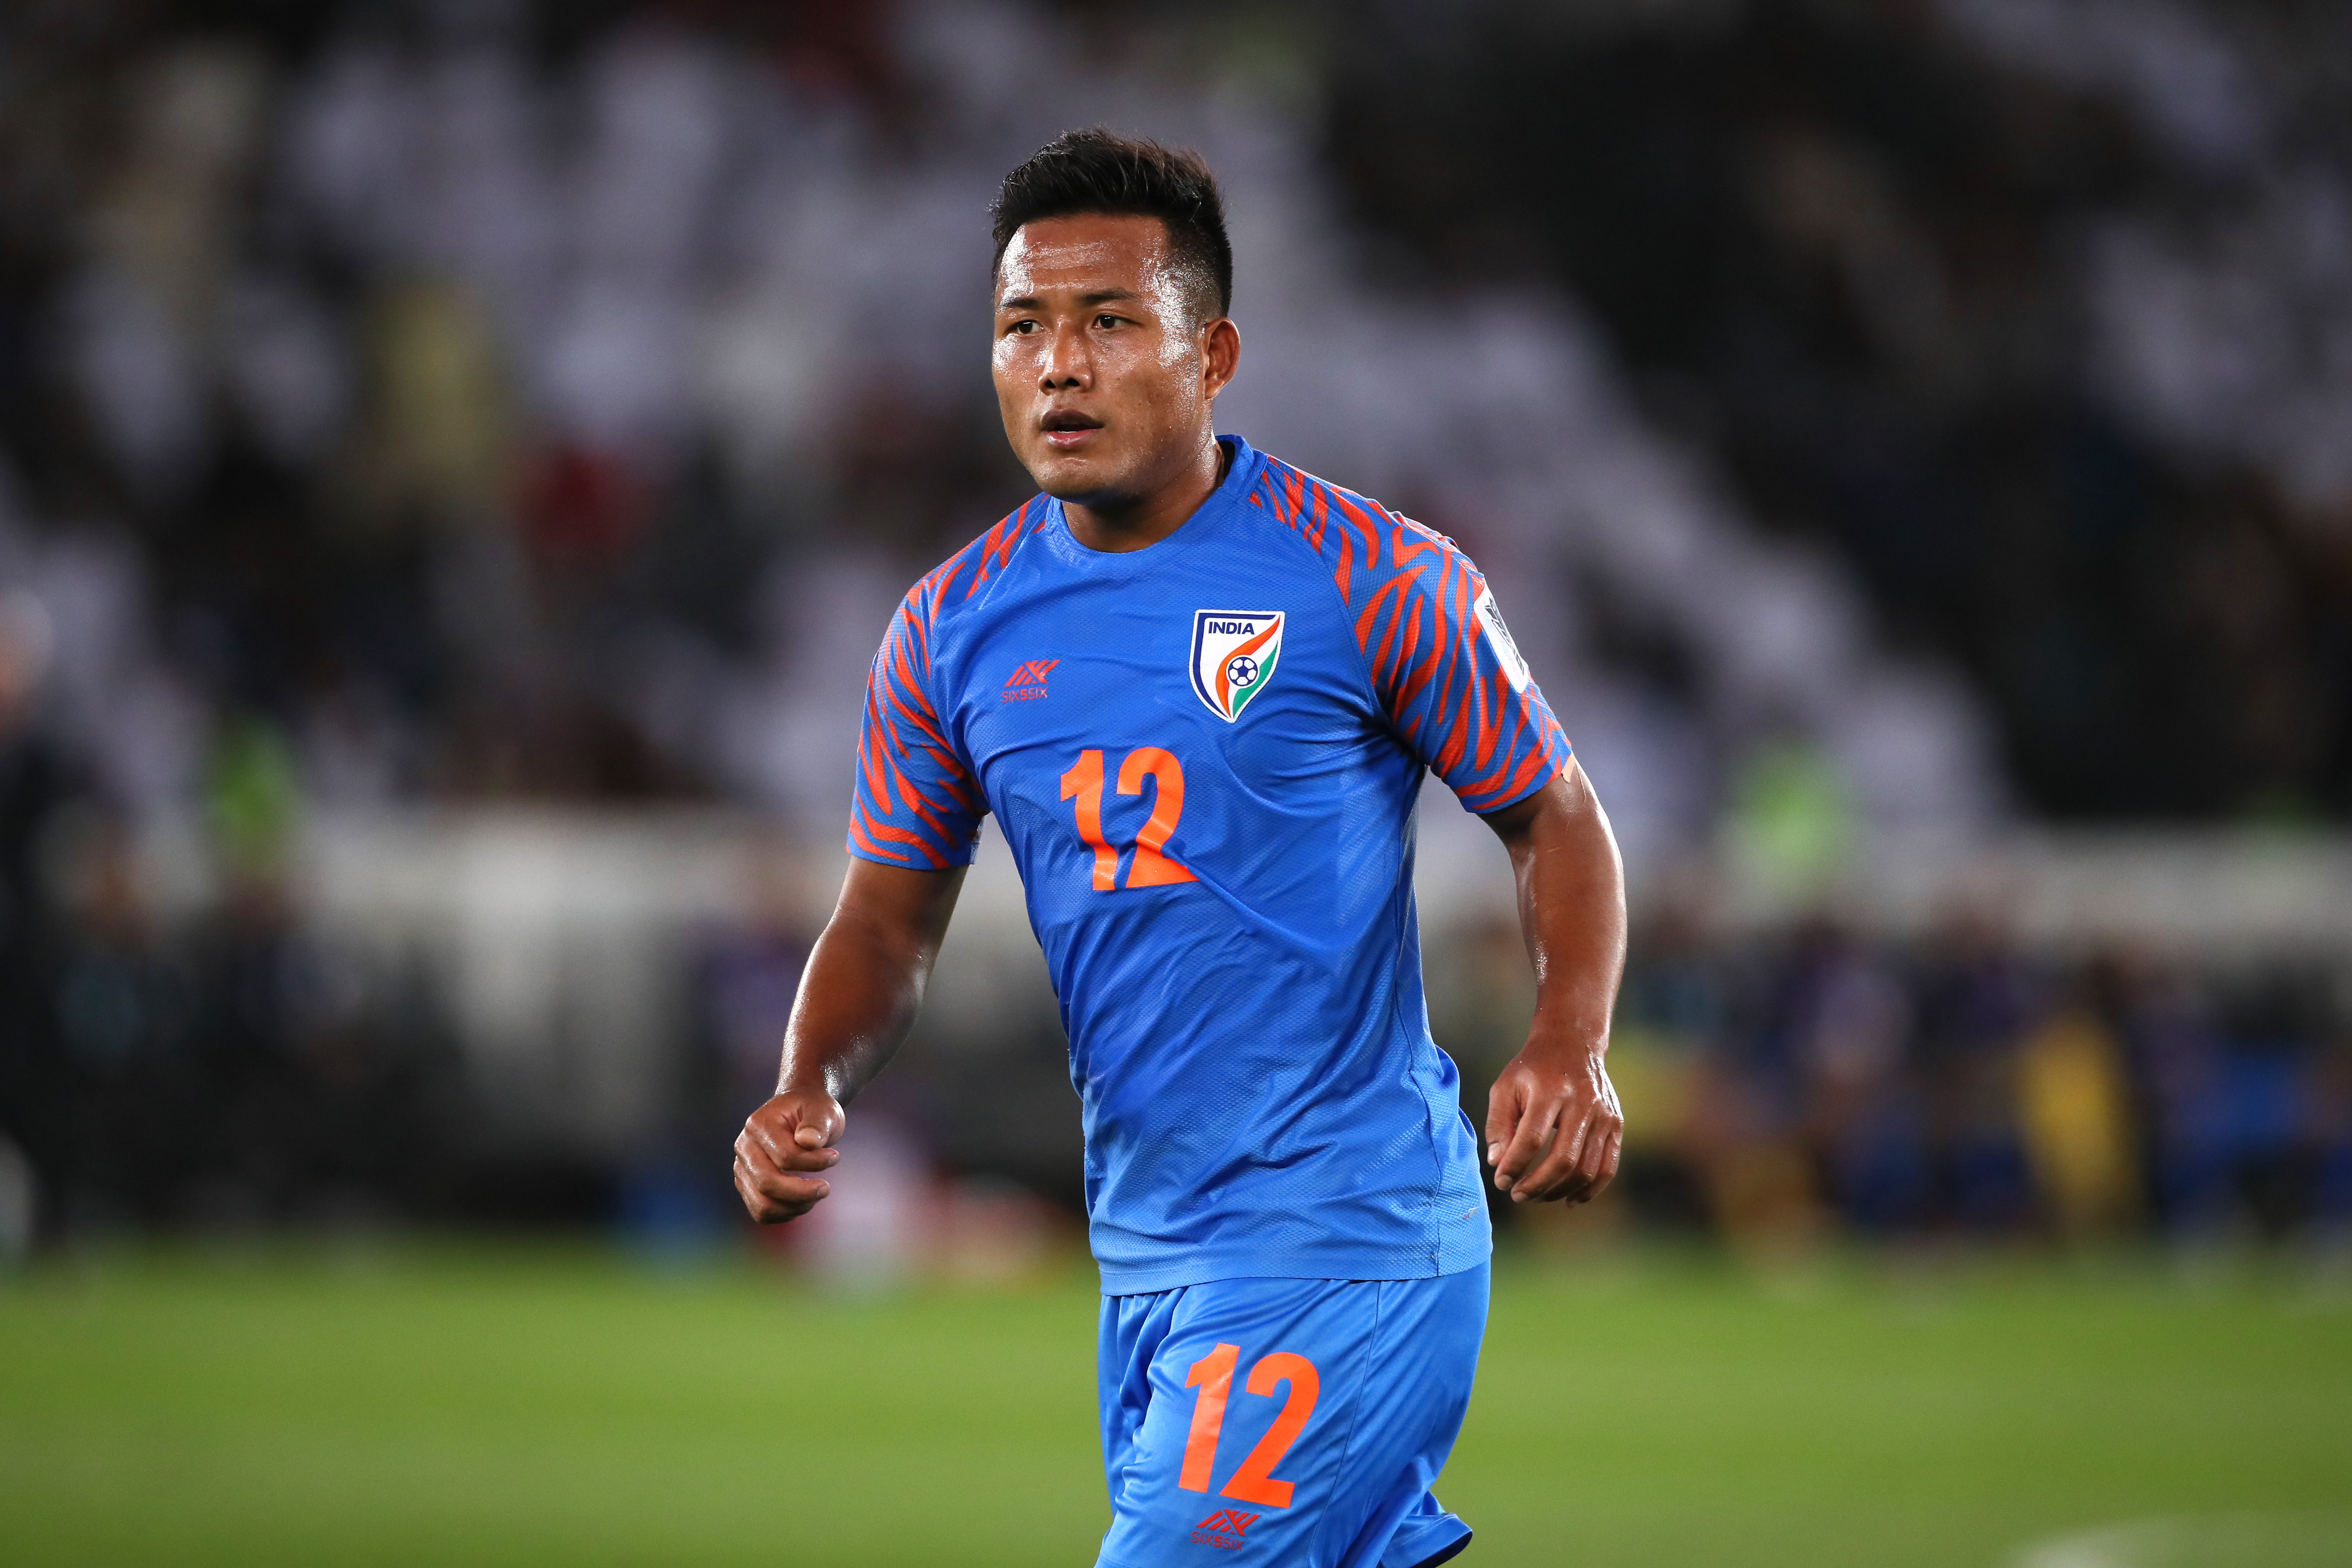 Players should make most of the opportunities provided by the ISL, claims Jeje Lalpekhlua